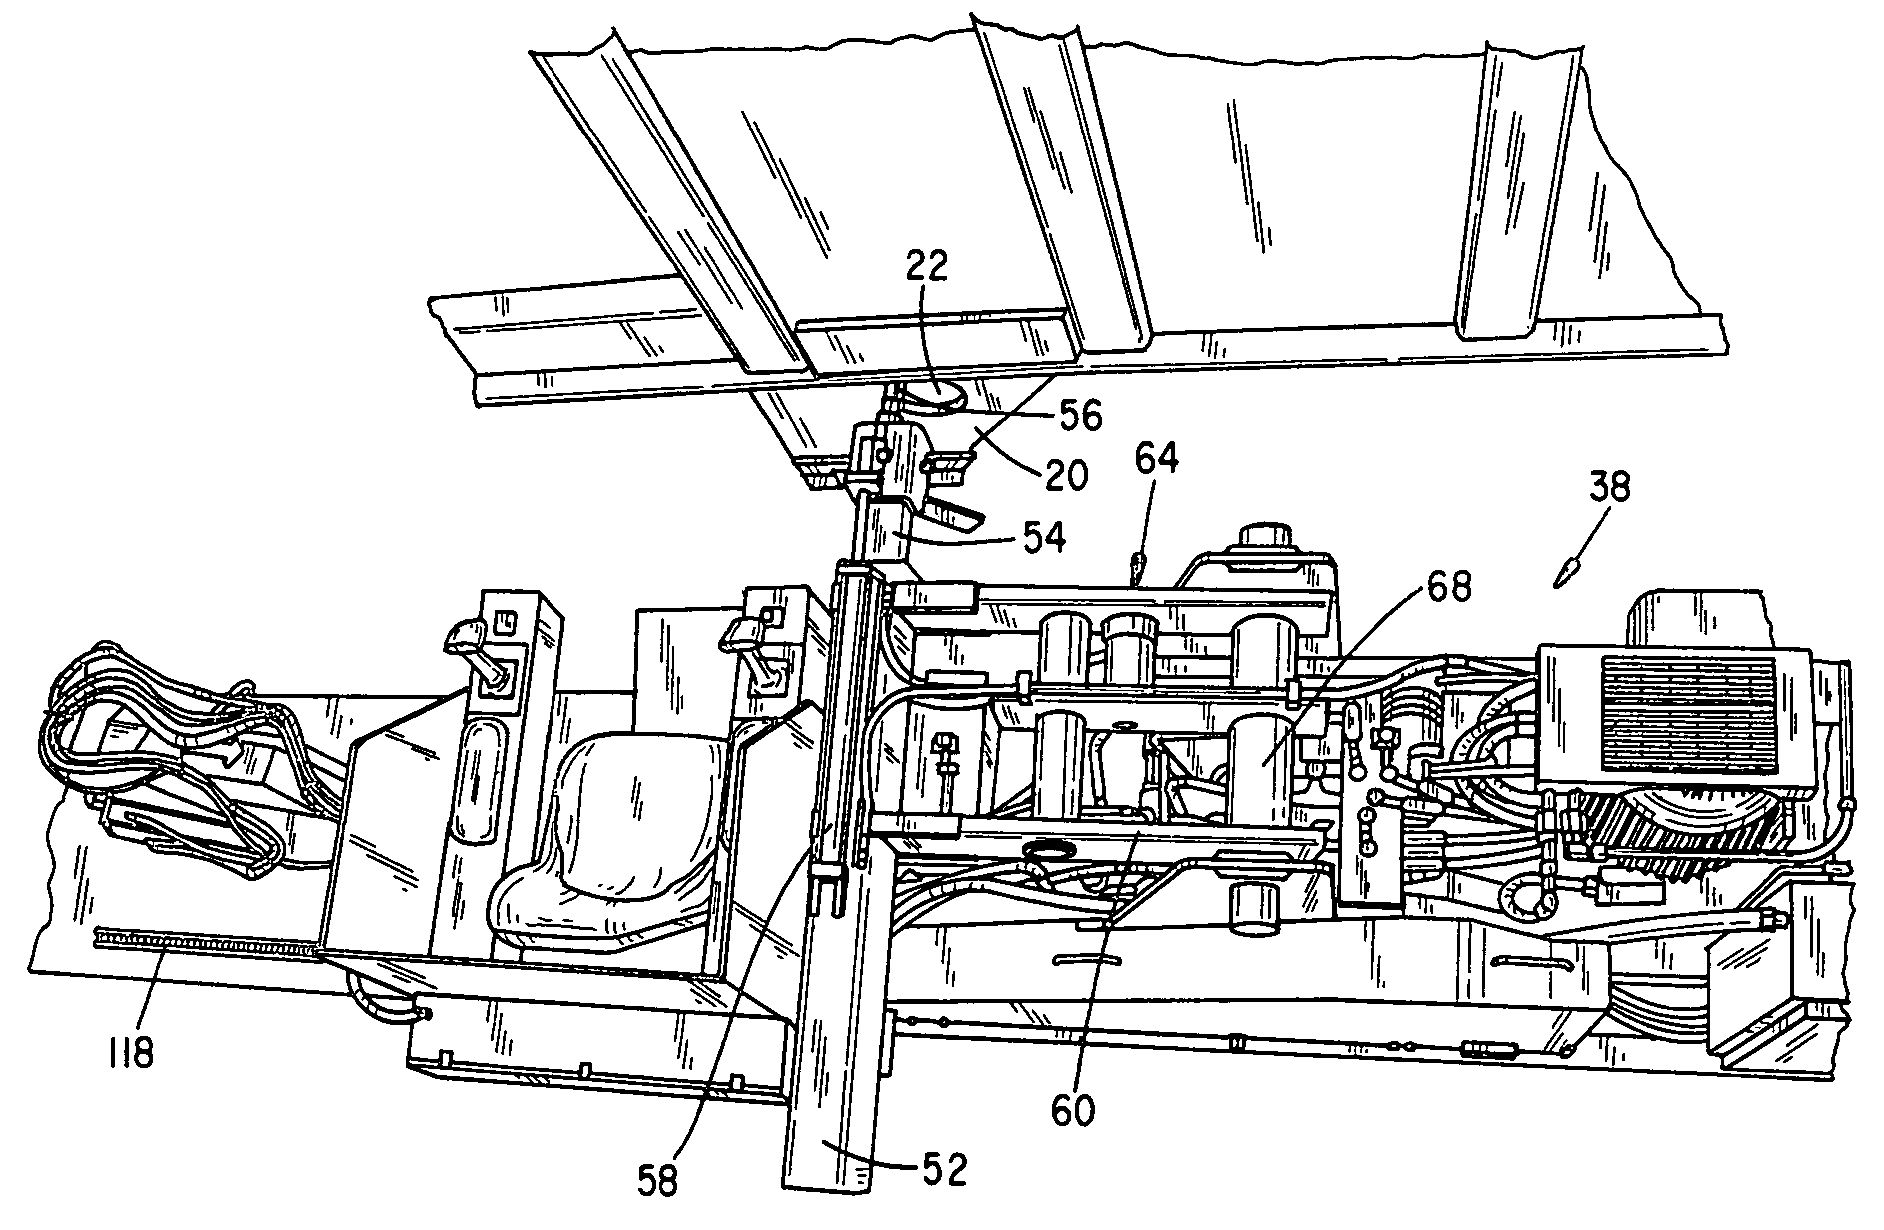 Spike-type railcar mover with optional gate opener